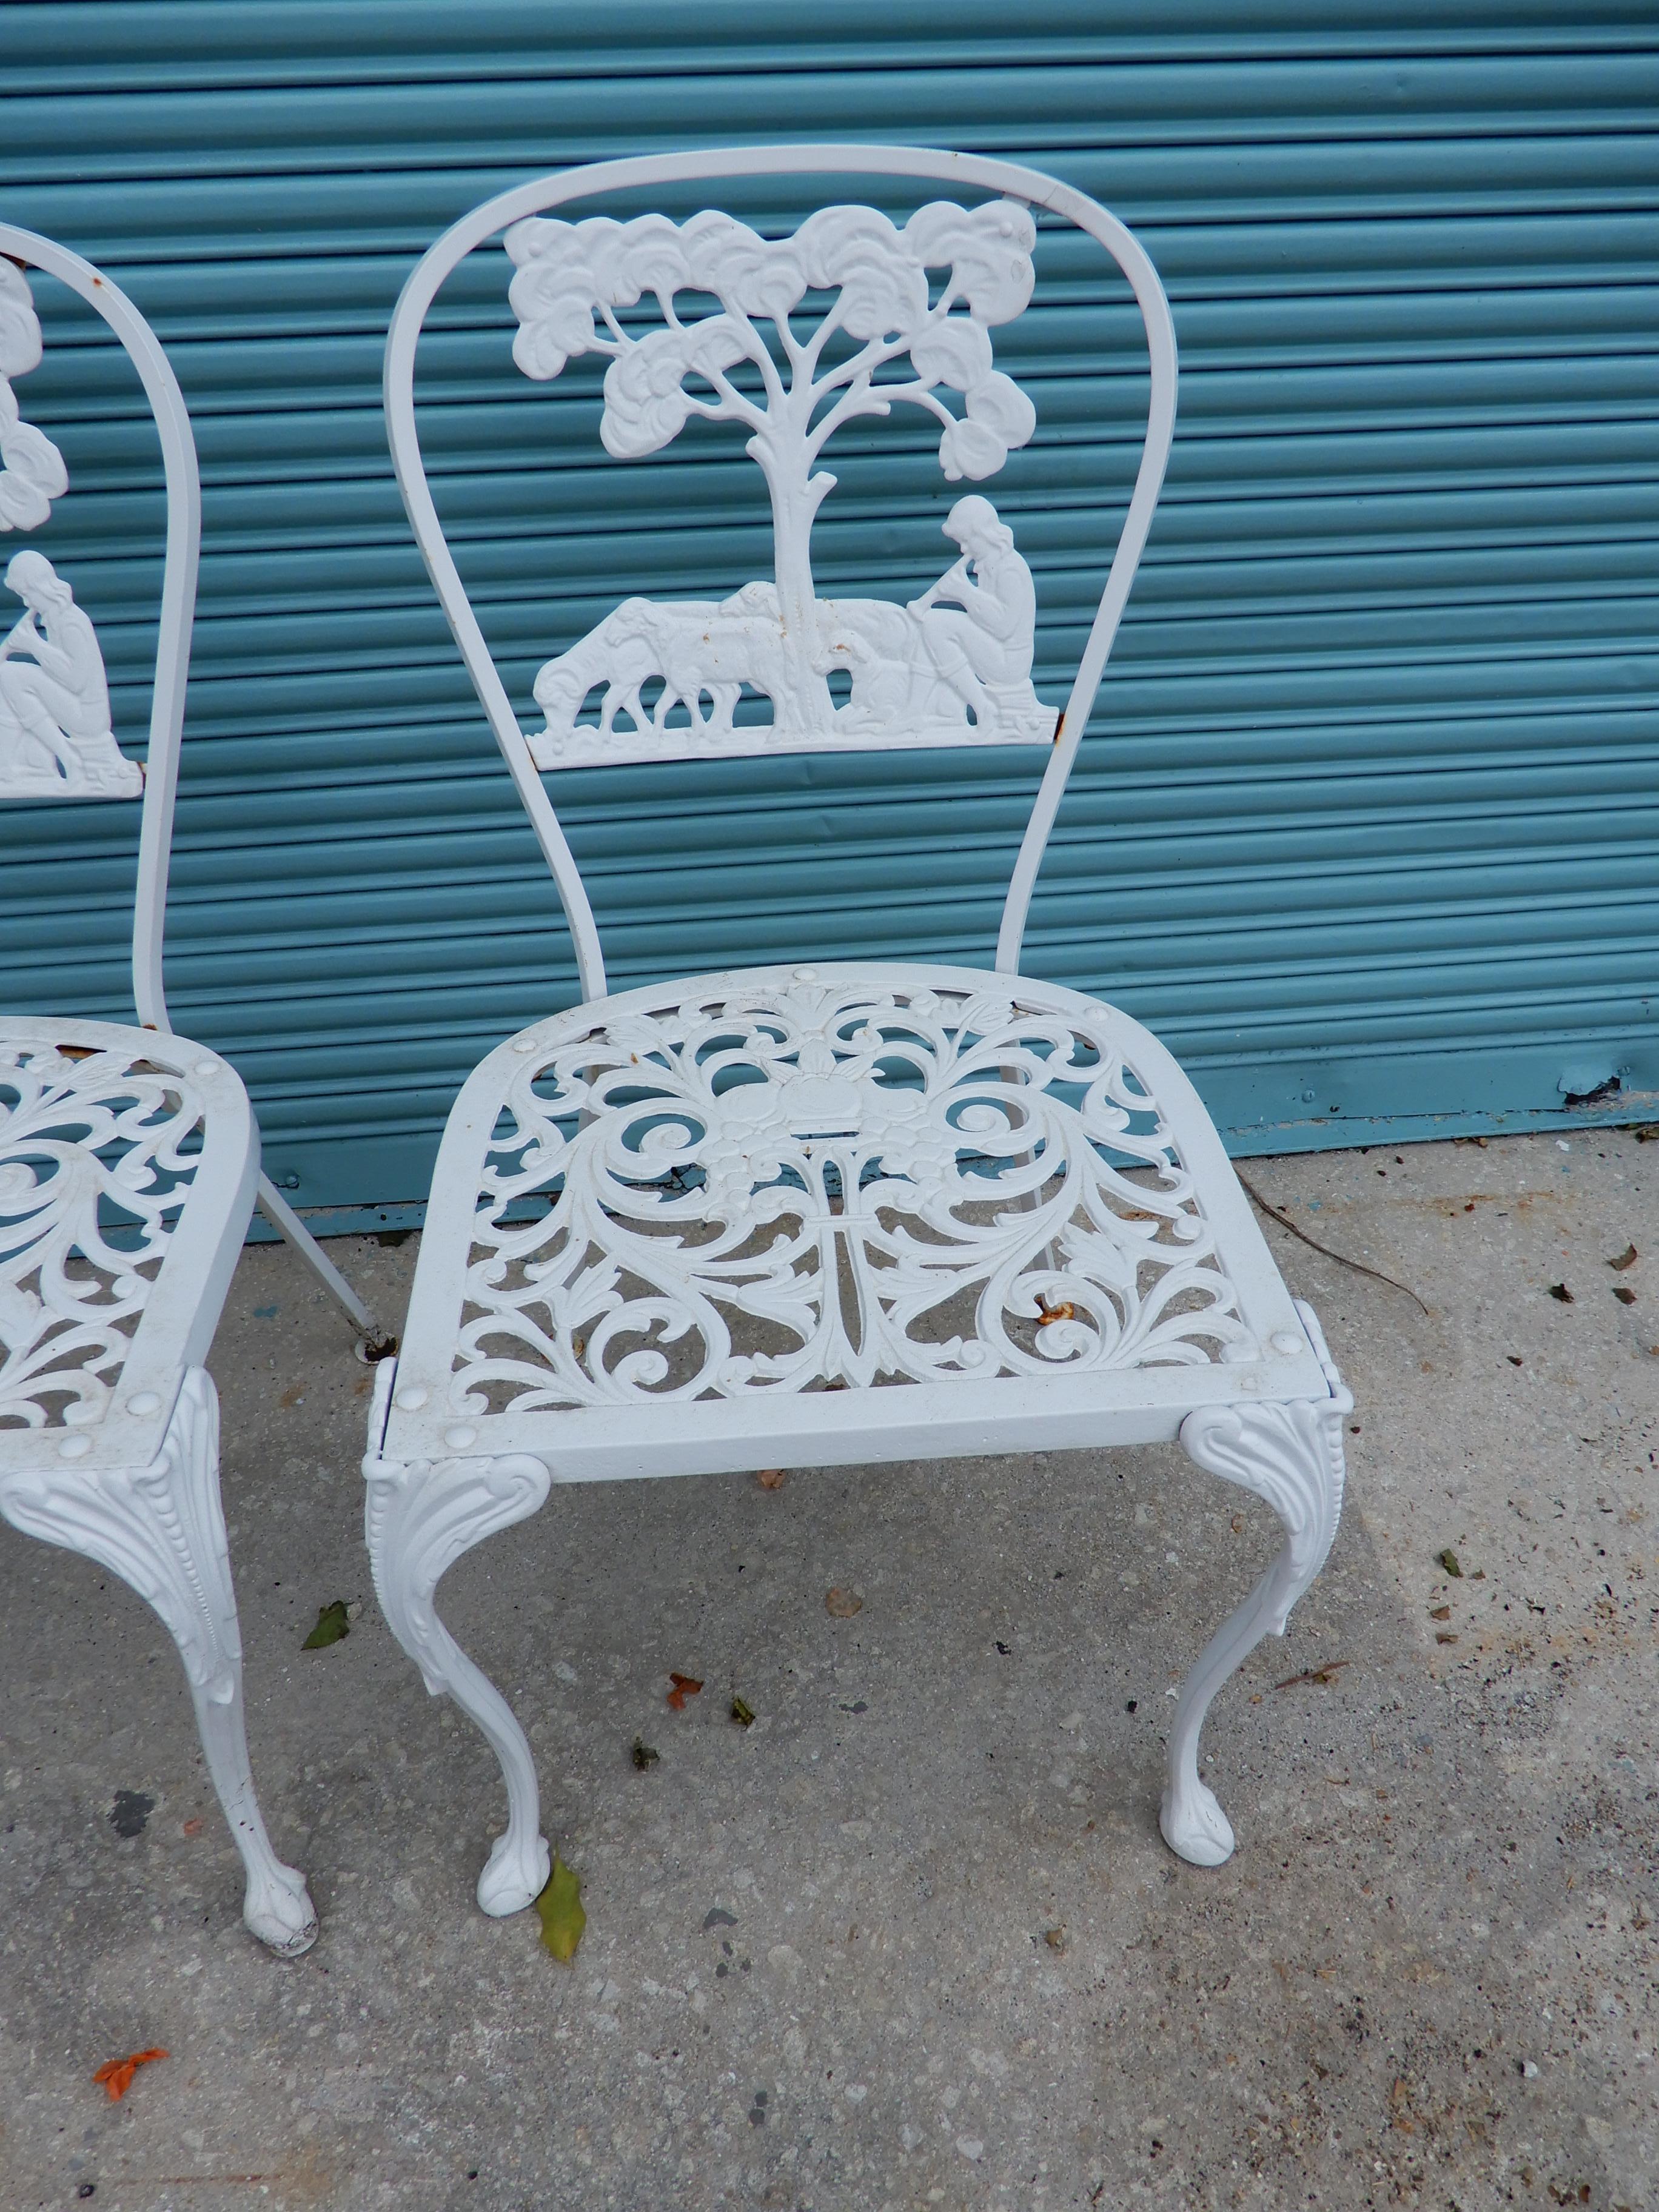 Molla Dining Chairs Figural Cast Aluminum im Zustand „Gut“ im Angebot in Long Island, NY